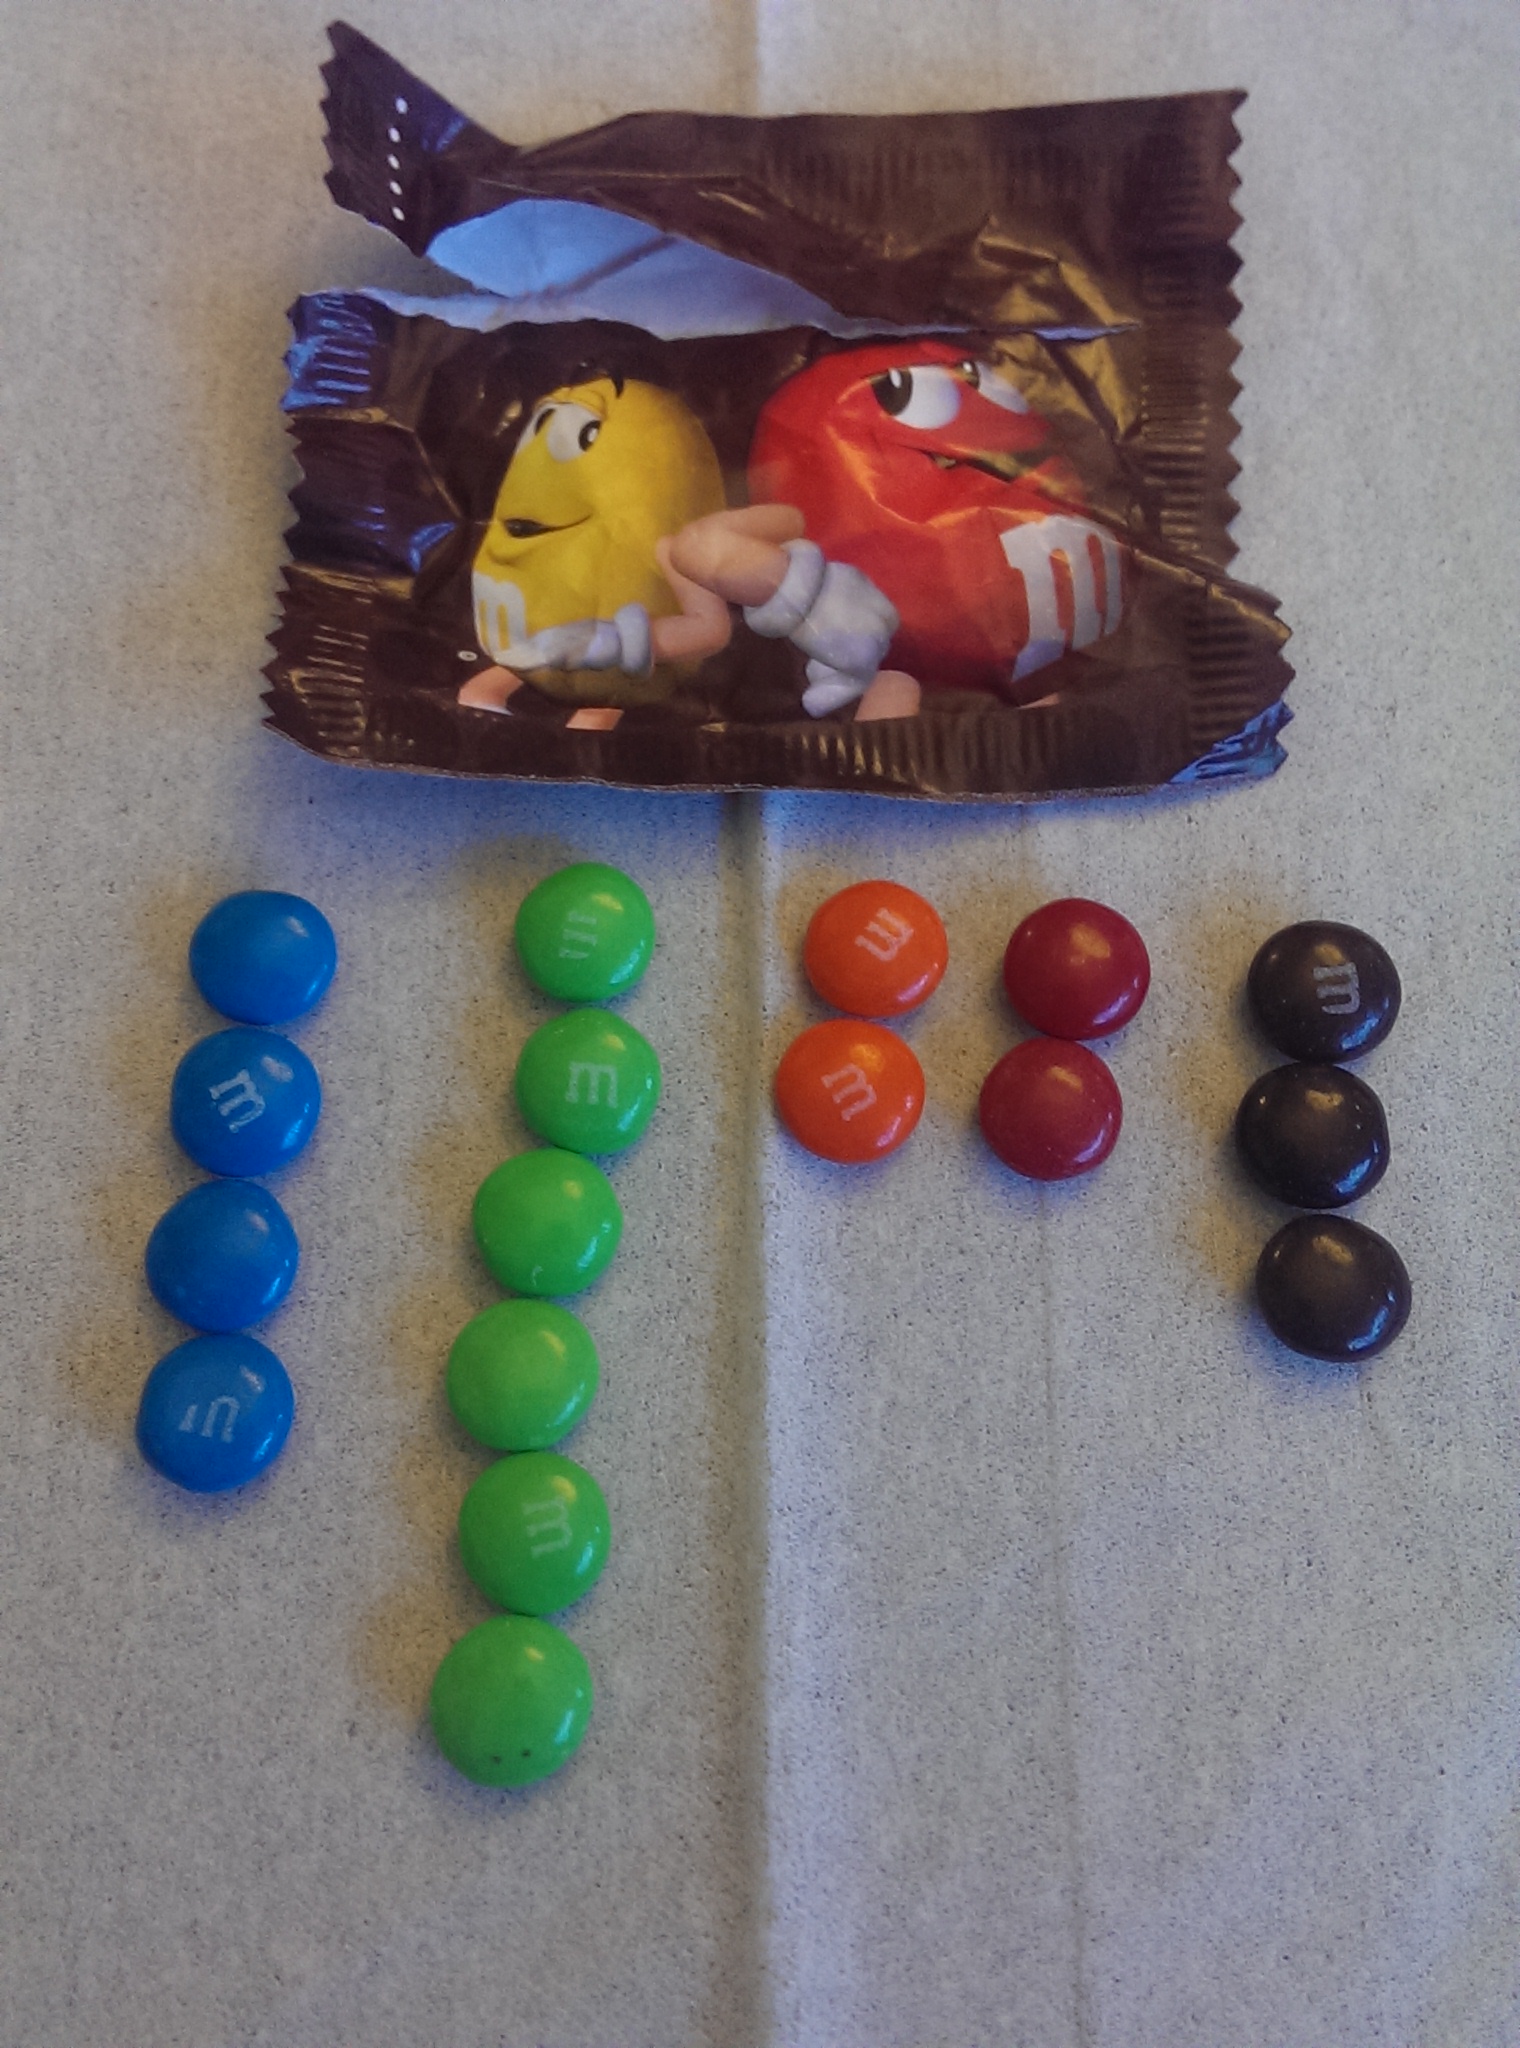 Do you know what individual M&M's are called?